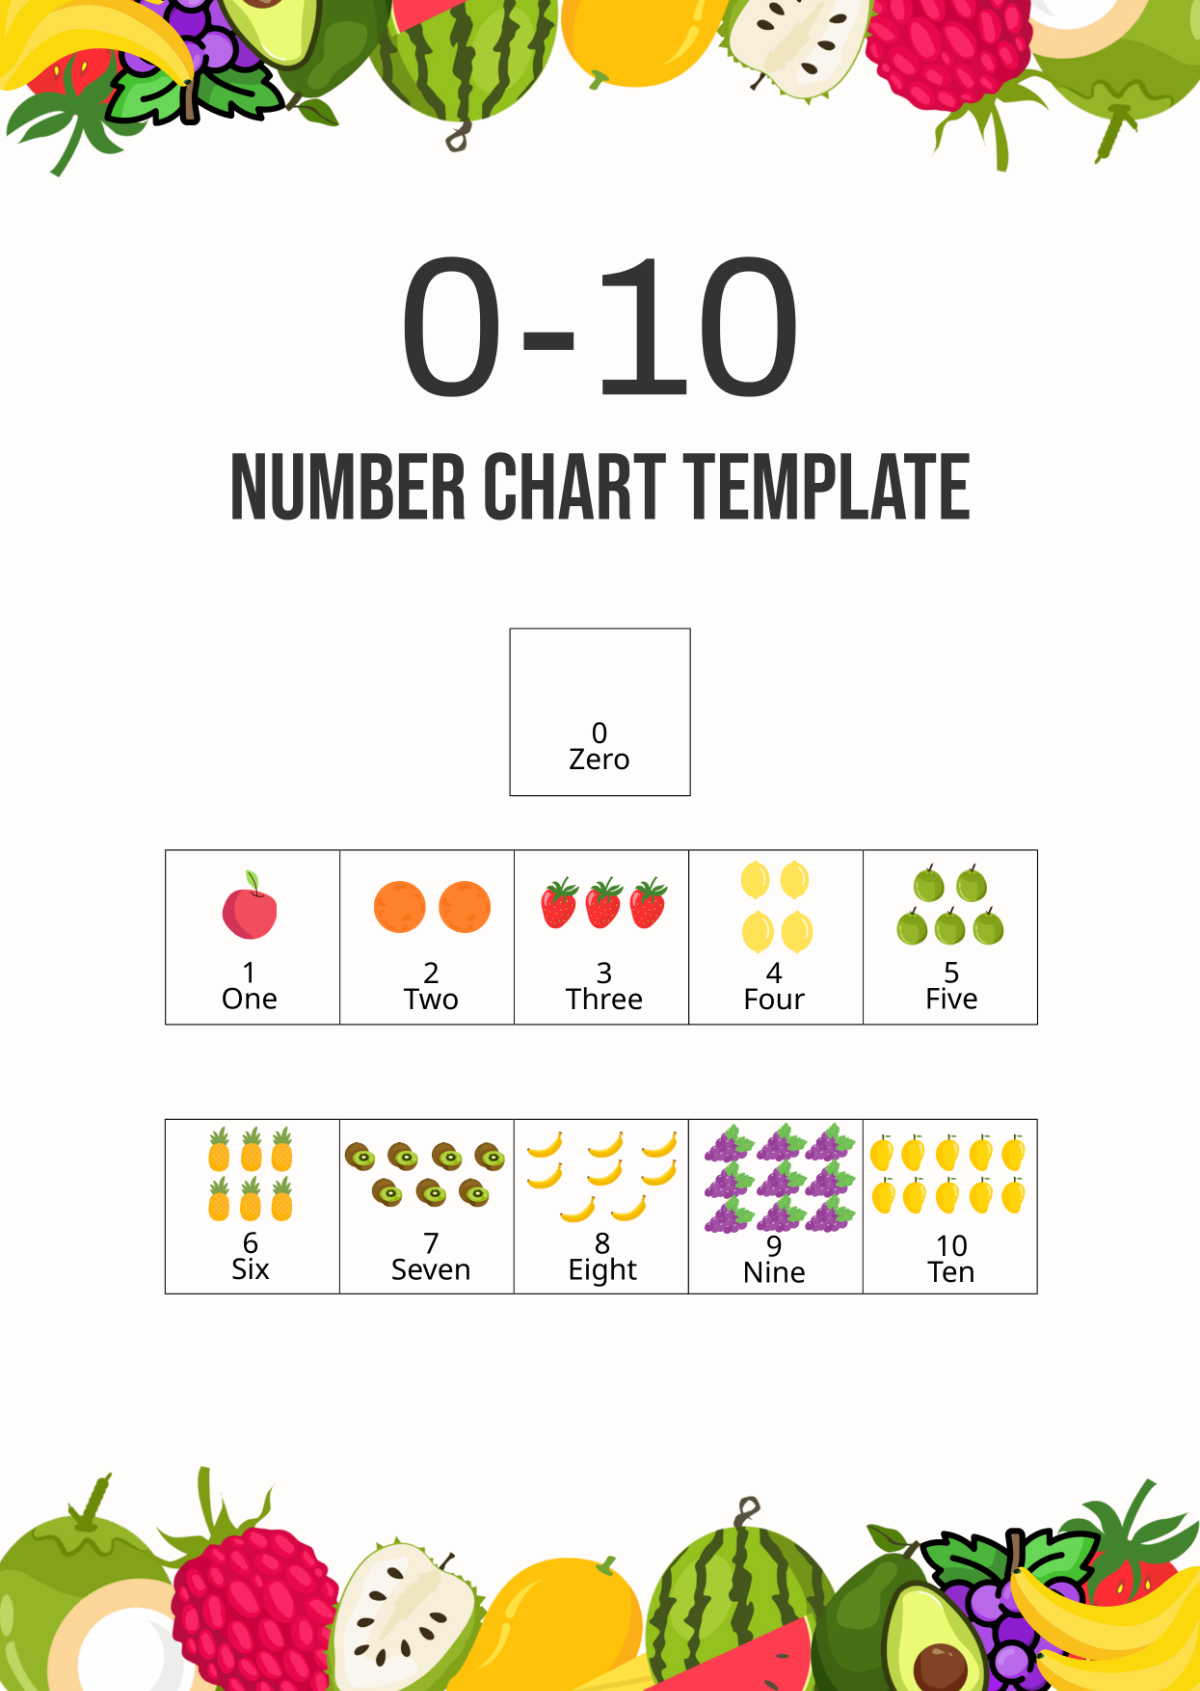 0-10 Number Chart